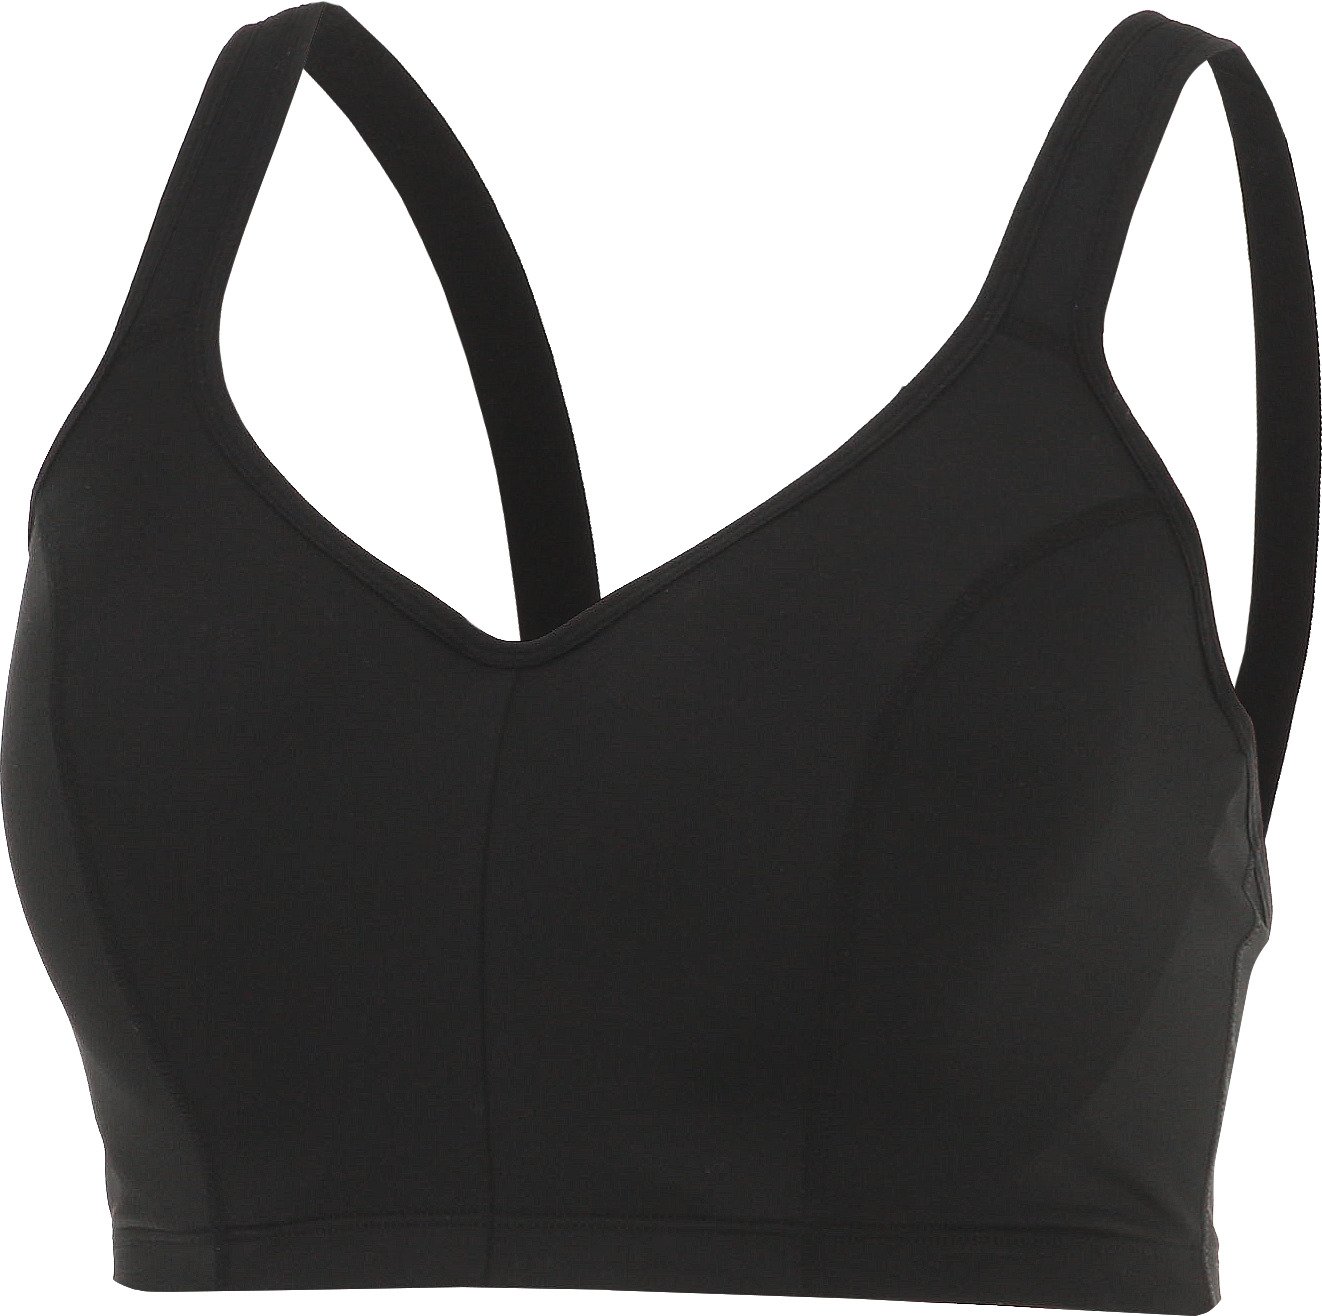 BCG Women's Plus Size High-Impact Molded Cup Bra | Academy